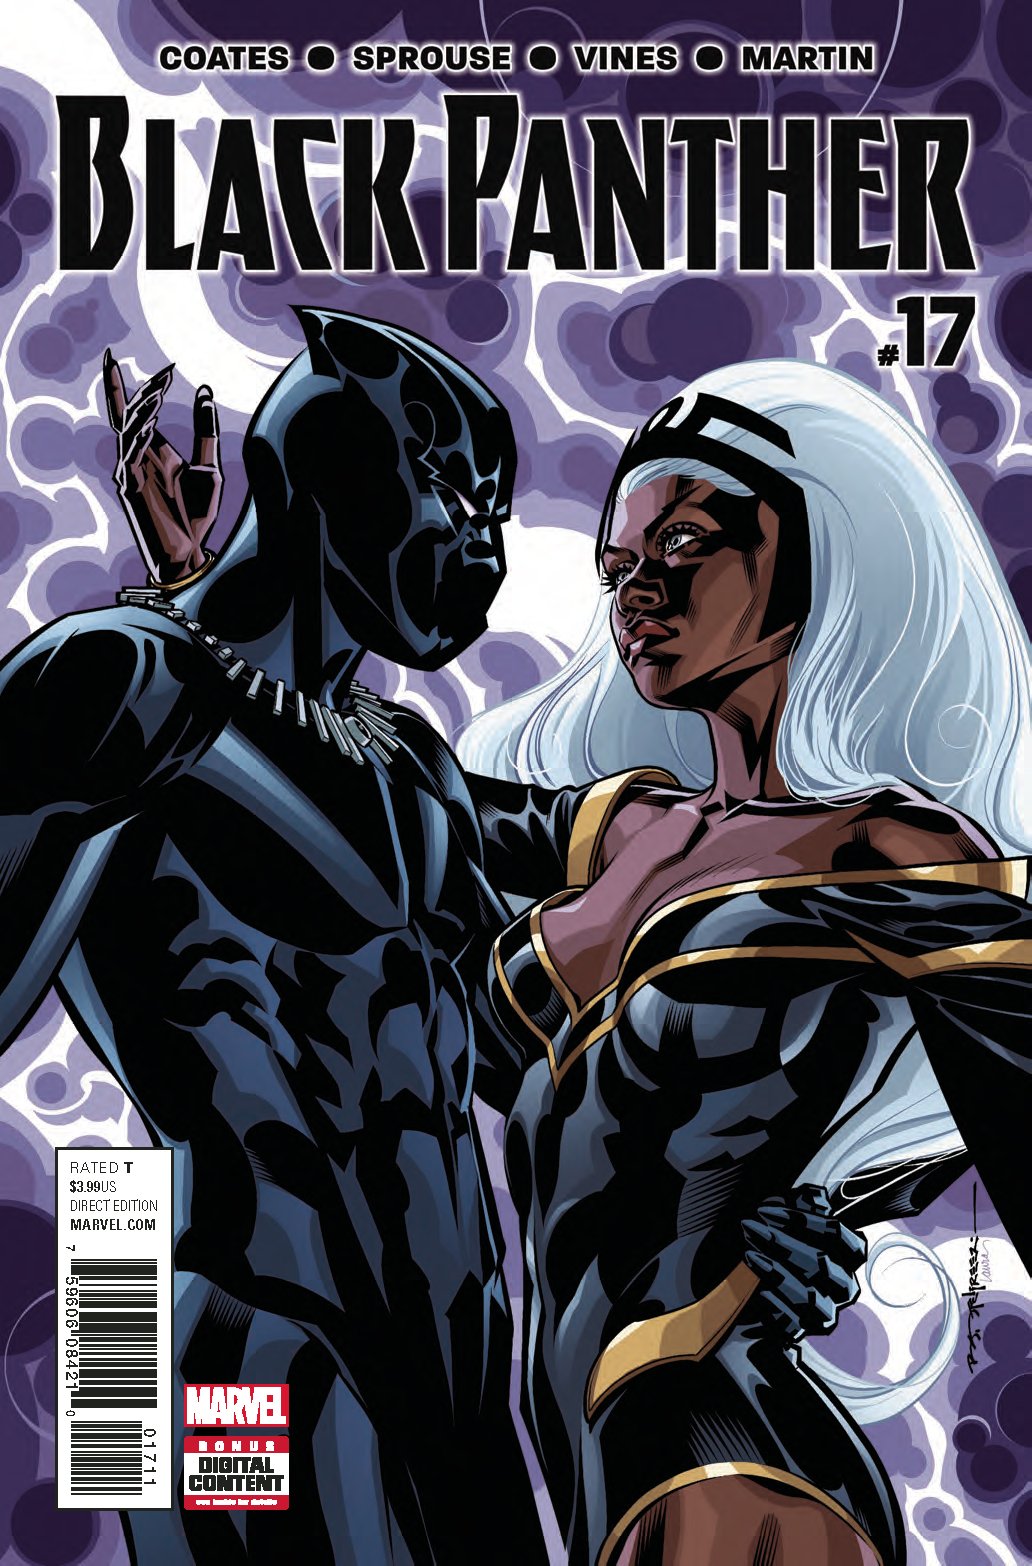 BLACK PANTHER #17 COVER